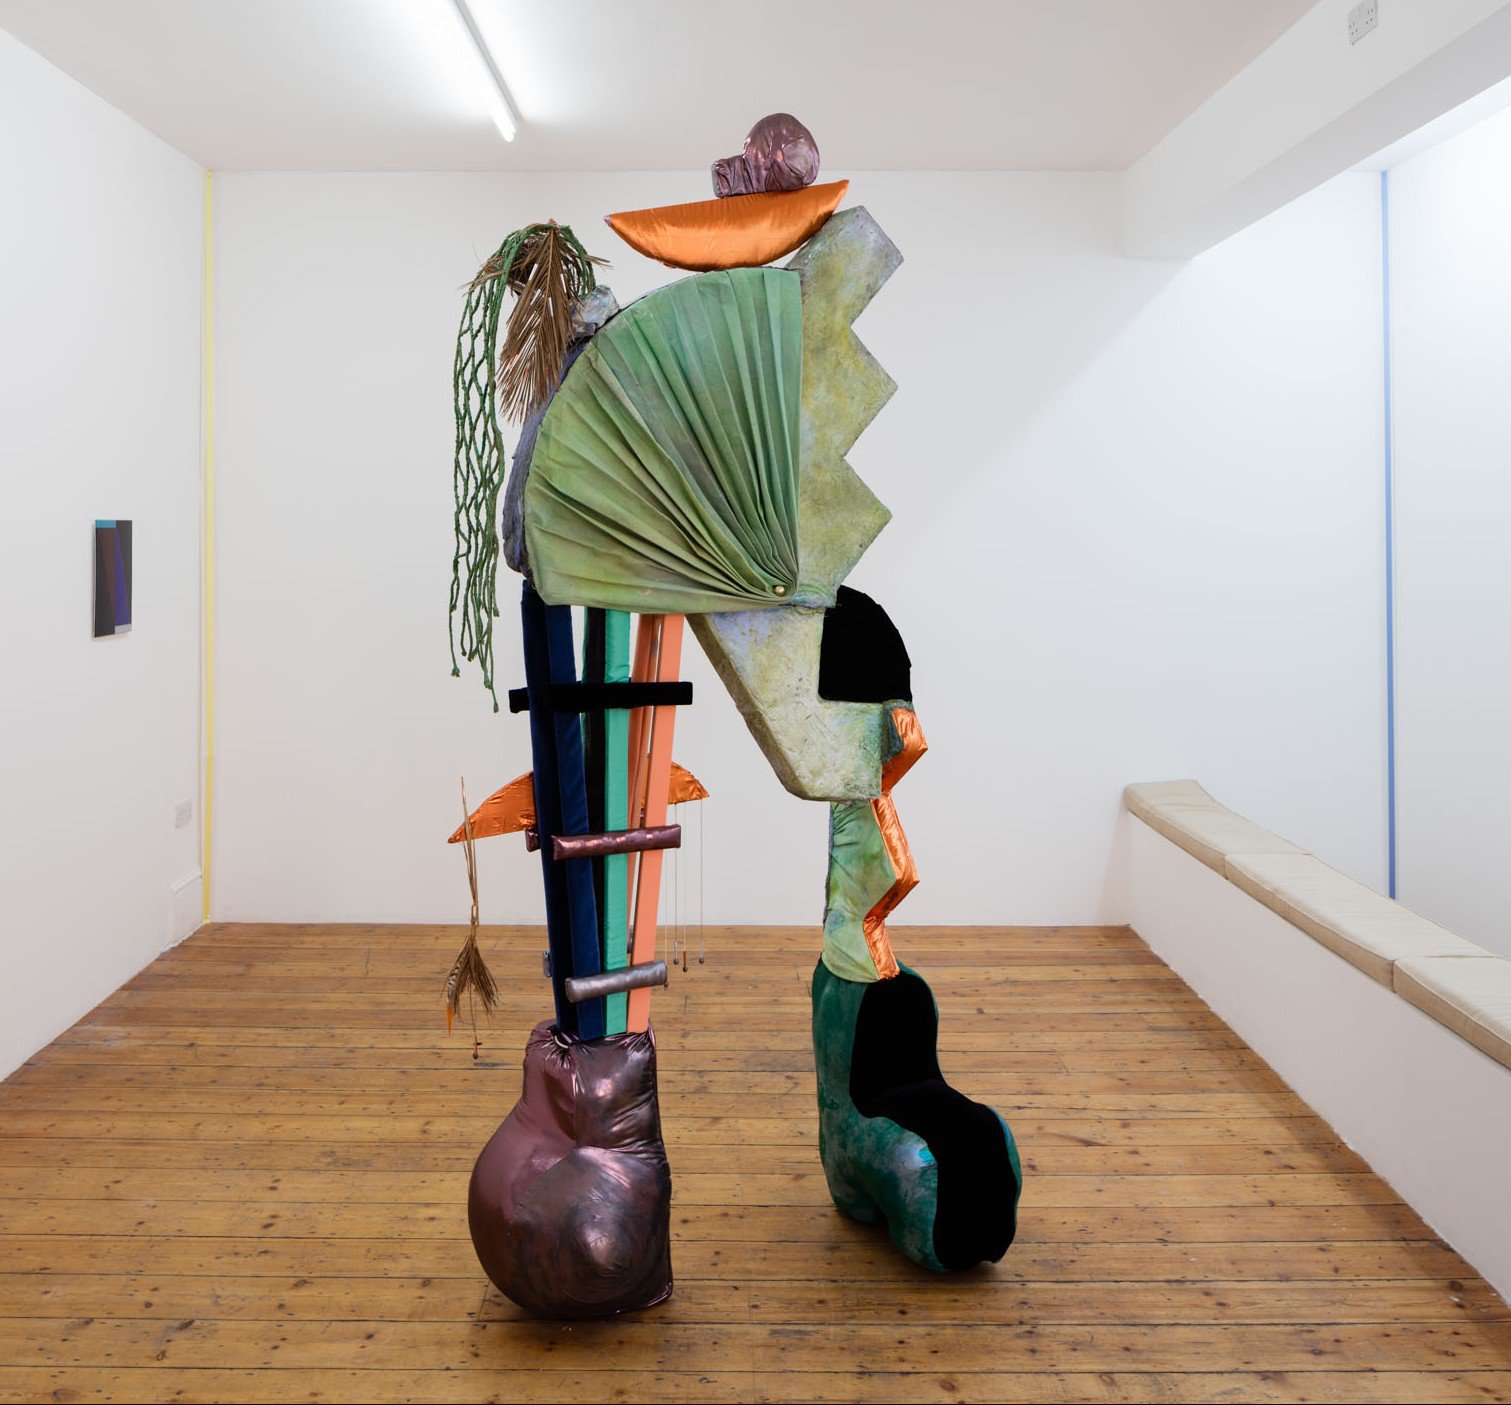 Tamara Henderson, The Scarecrow’s Holiday, textile, wood, glass, sand, pigment, rope, 260 x 112 x 56 cm, 2015. Installation view, Condo, Callicoon Fine Arts with Rodeo, London, 2016